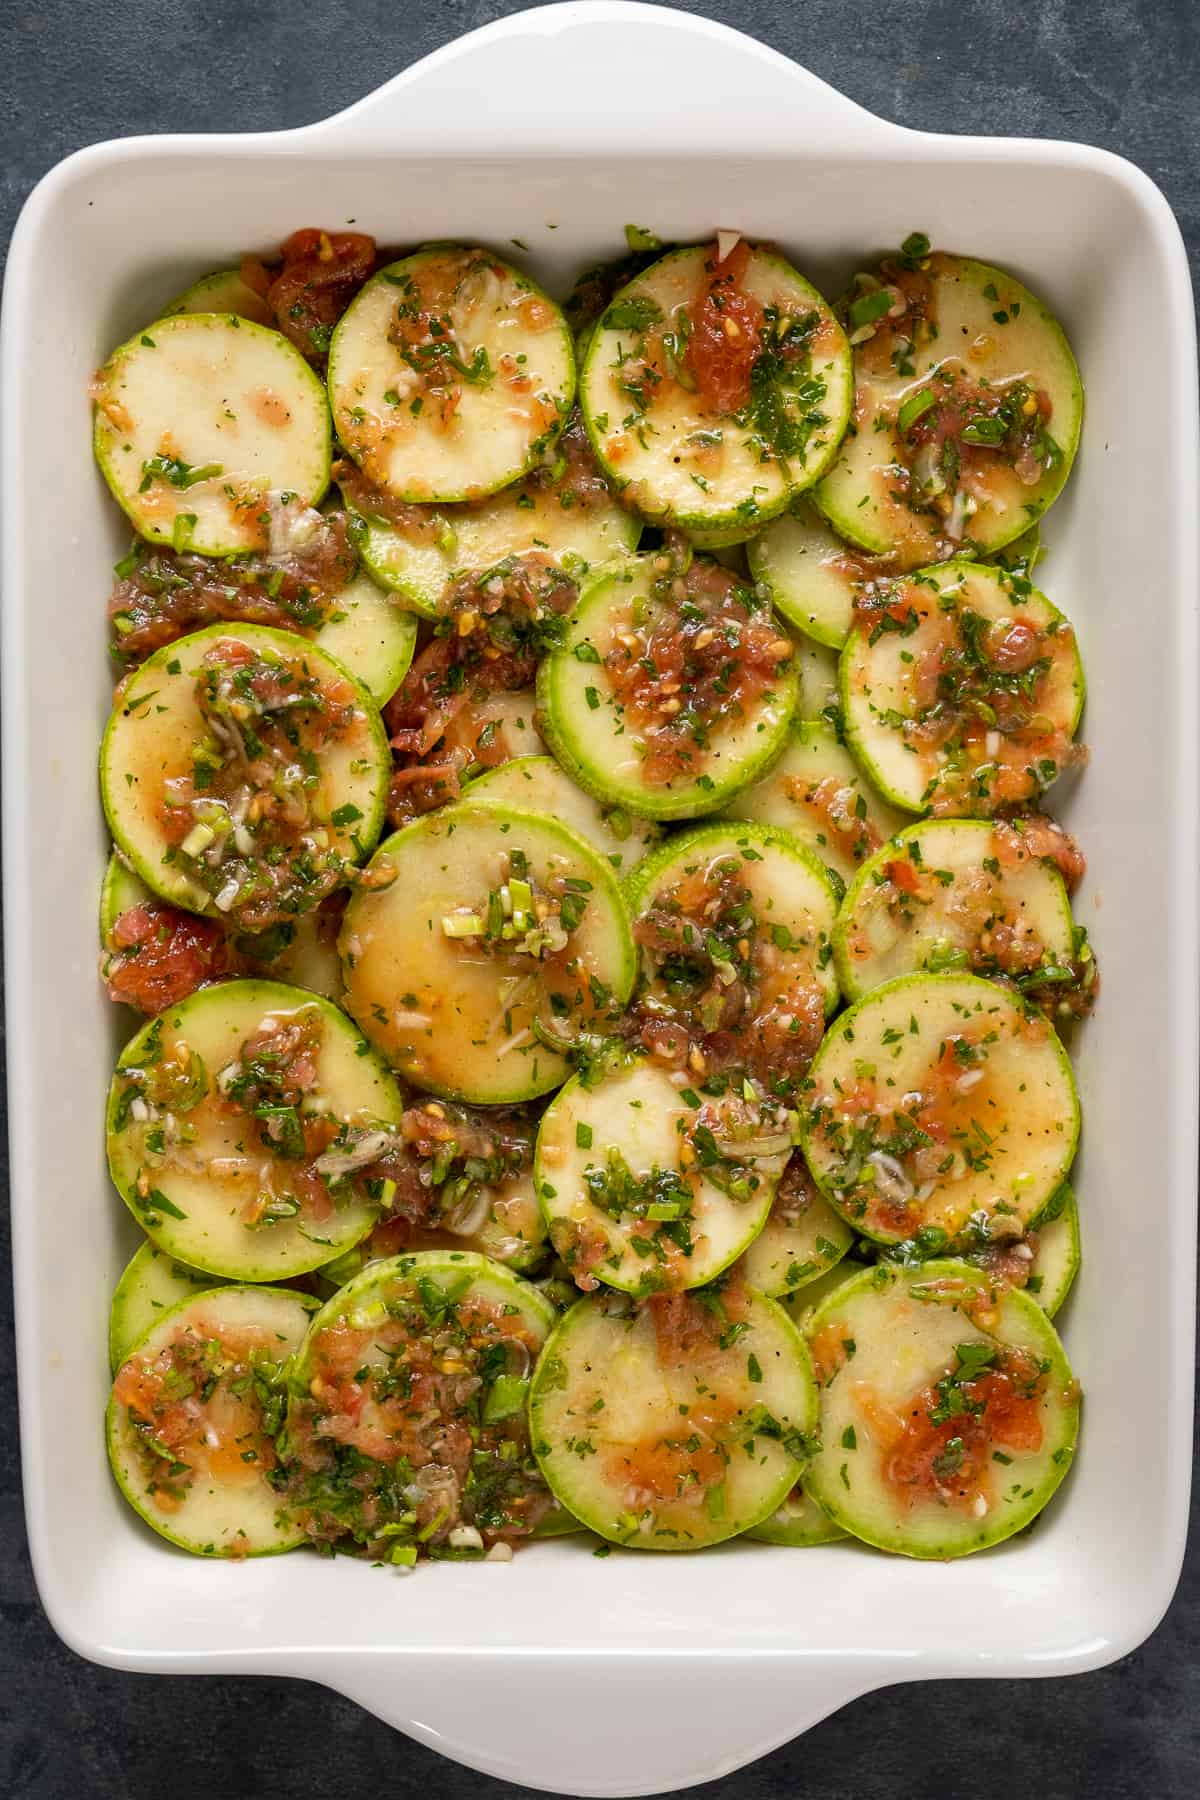 Zucchini slices coated with the tomato and herbs sauce in a white rectangular baking pan.